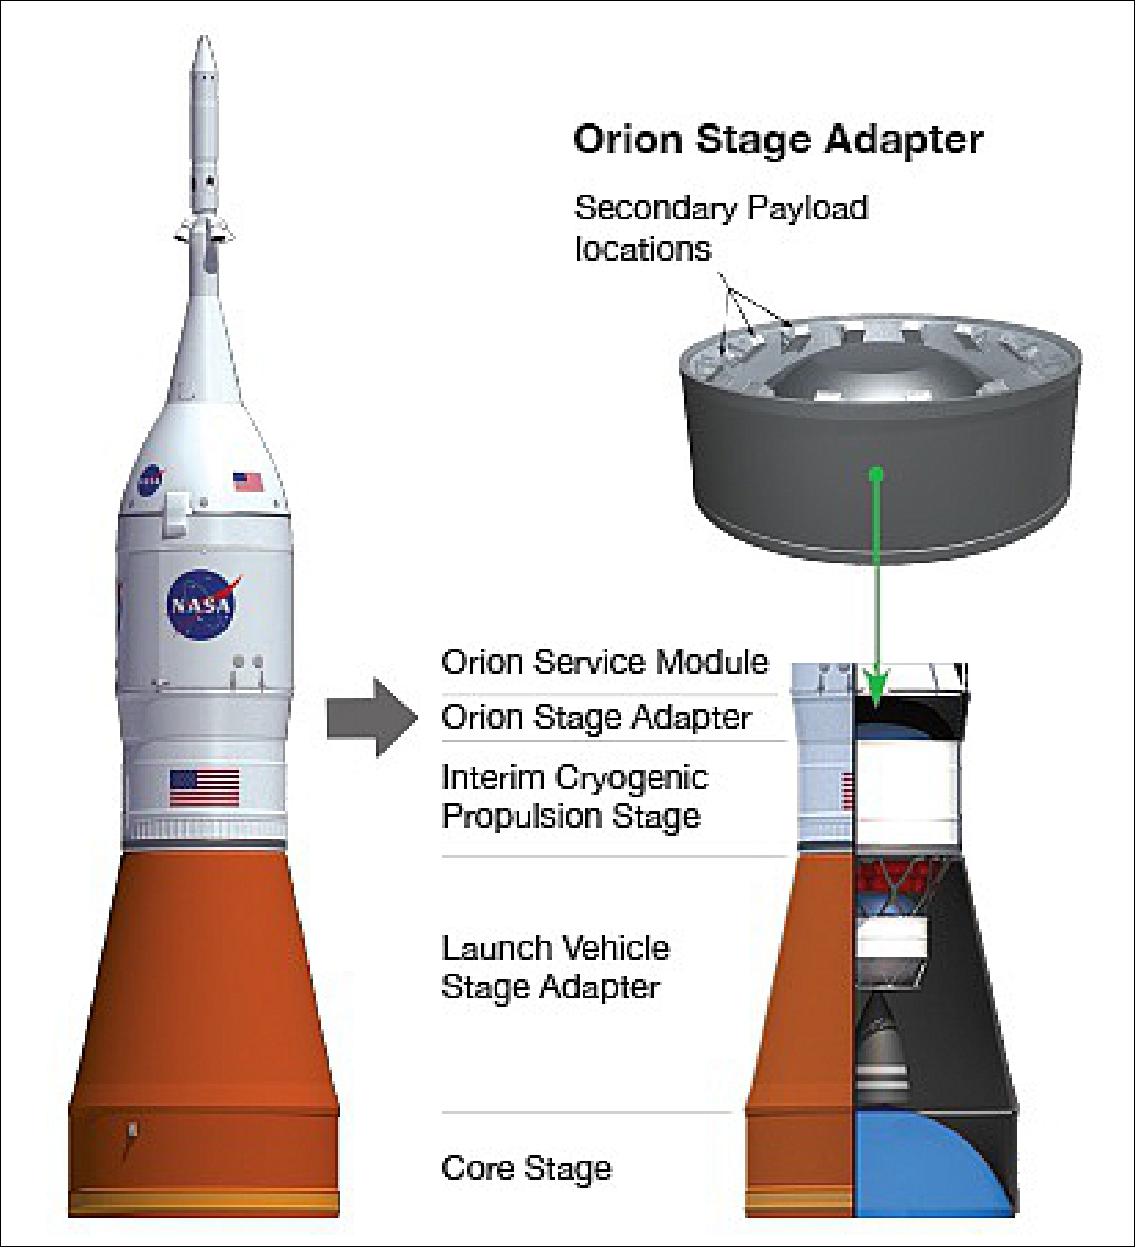 Figure 12: The CubeSats will be deployed from the Orion Stage Adapter (image credit: NASA, Ref. 17)